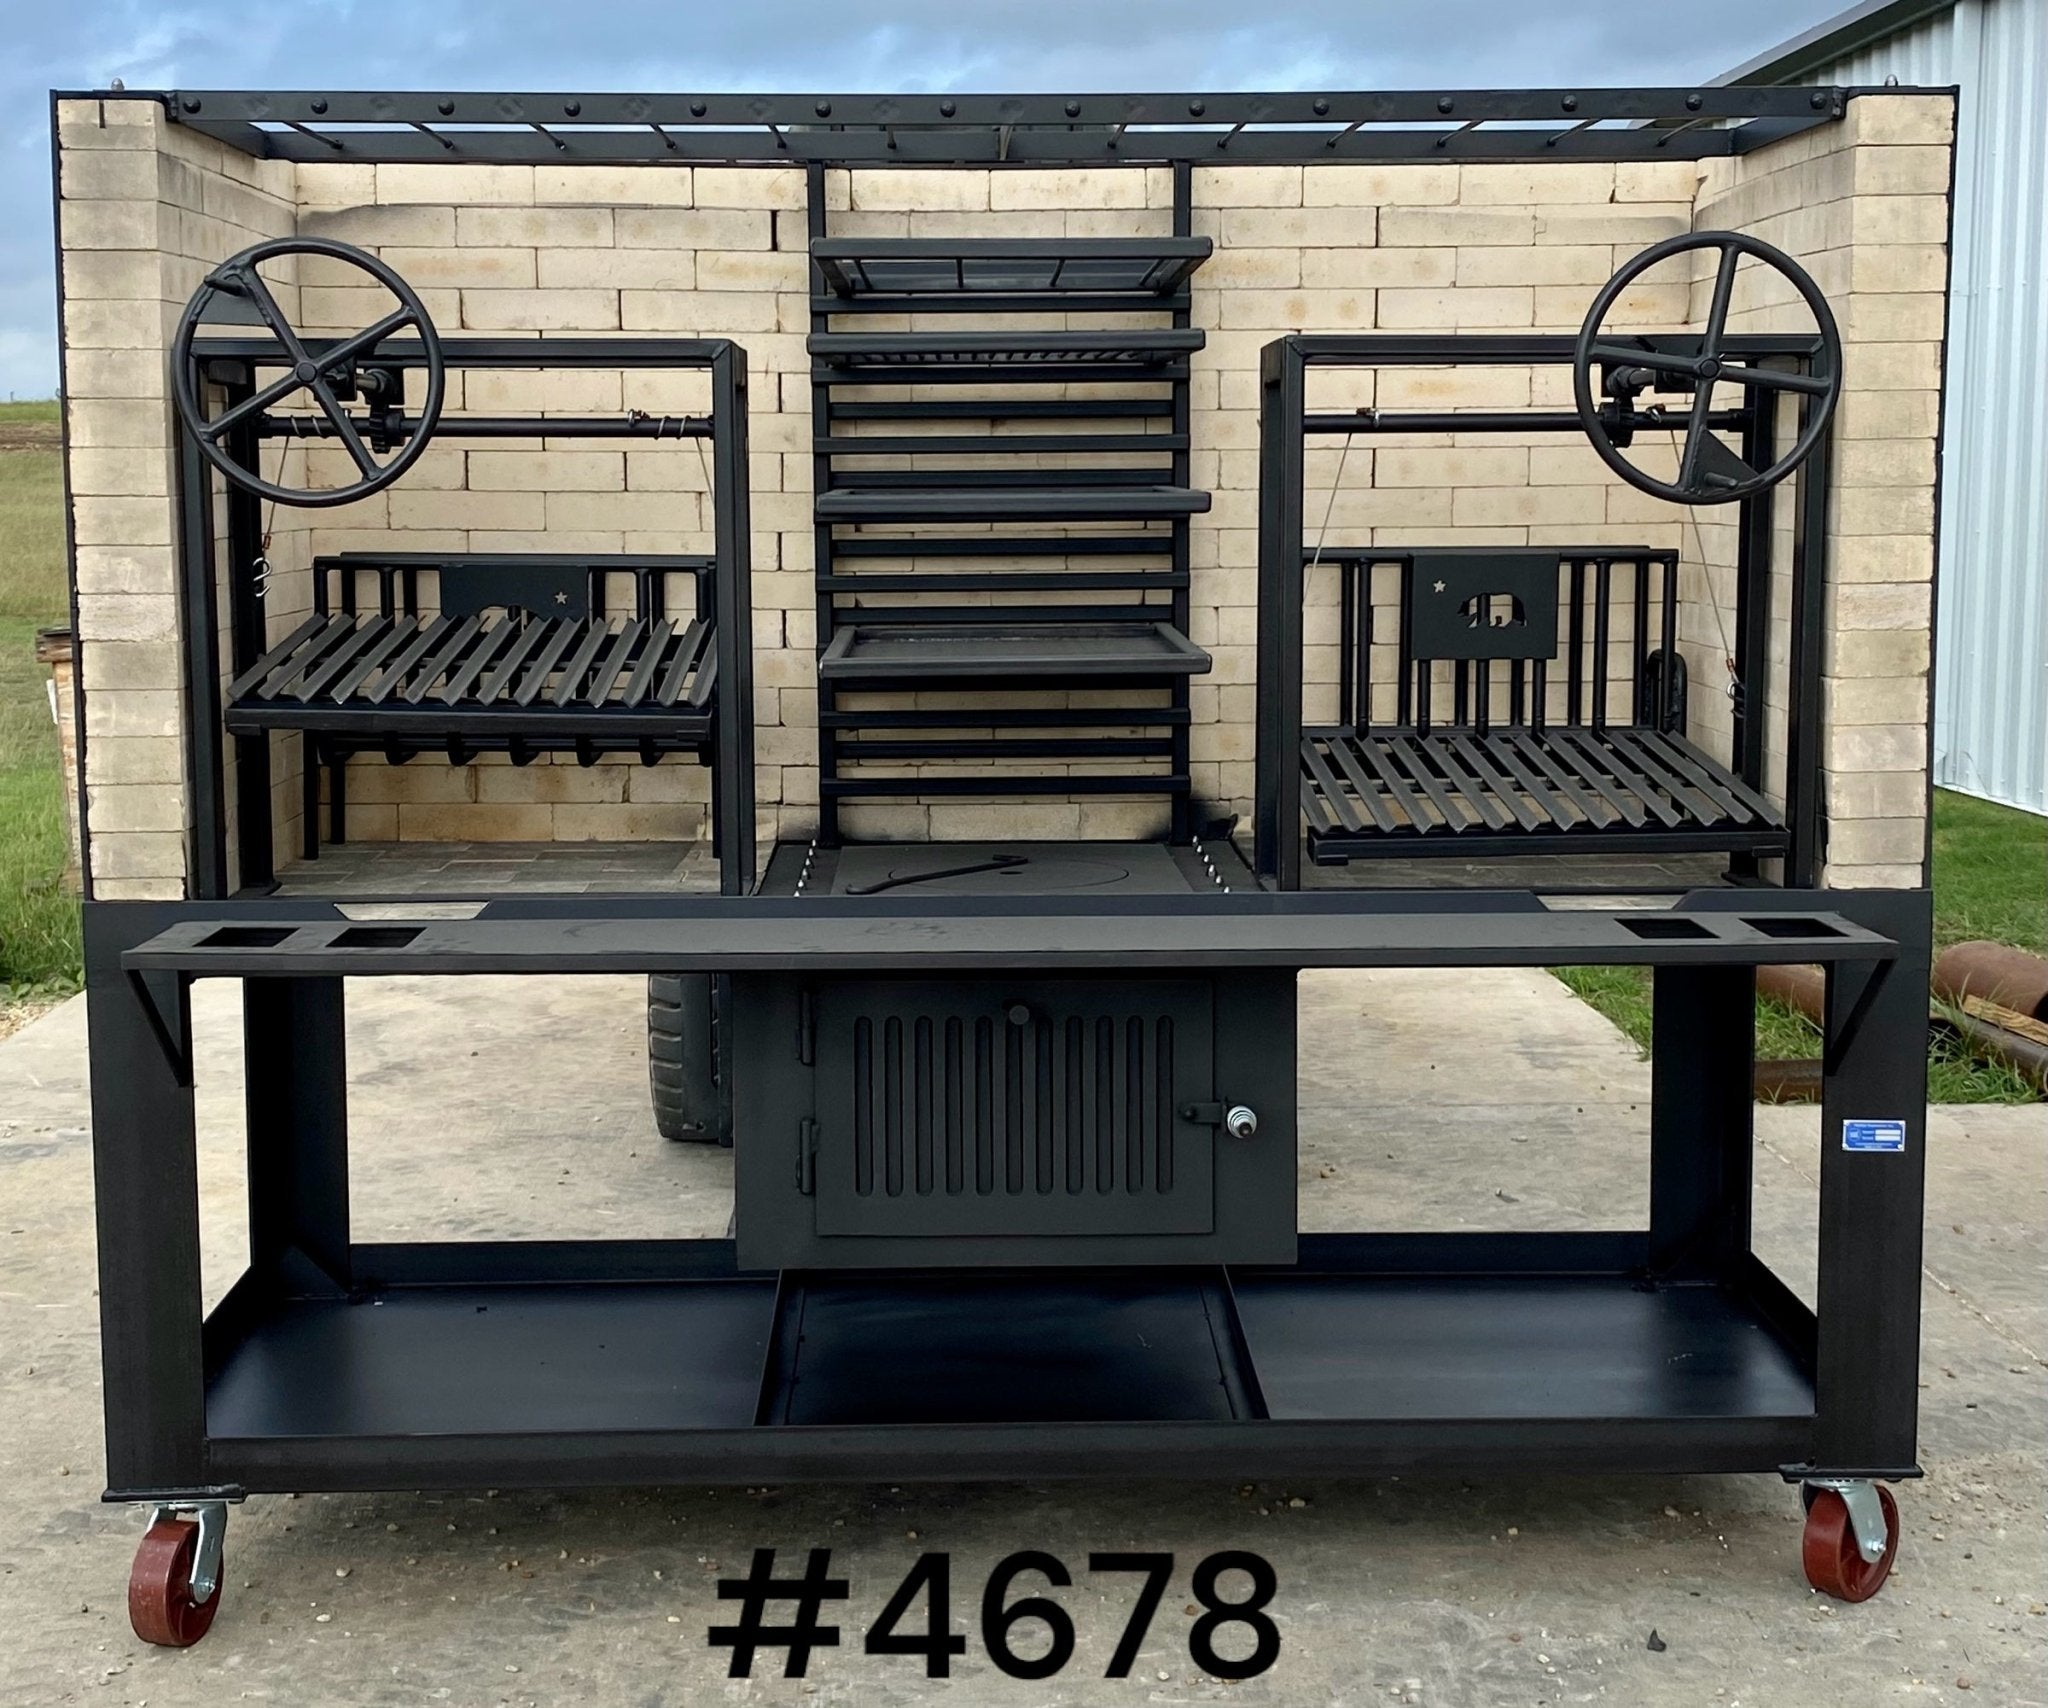 Tradition meets precision with our all-new Argentine grill! Complete with a  heavy-duty adjustable grate, s-hooks for hanging meat and fir